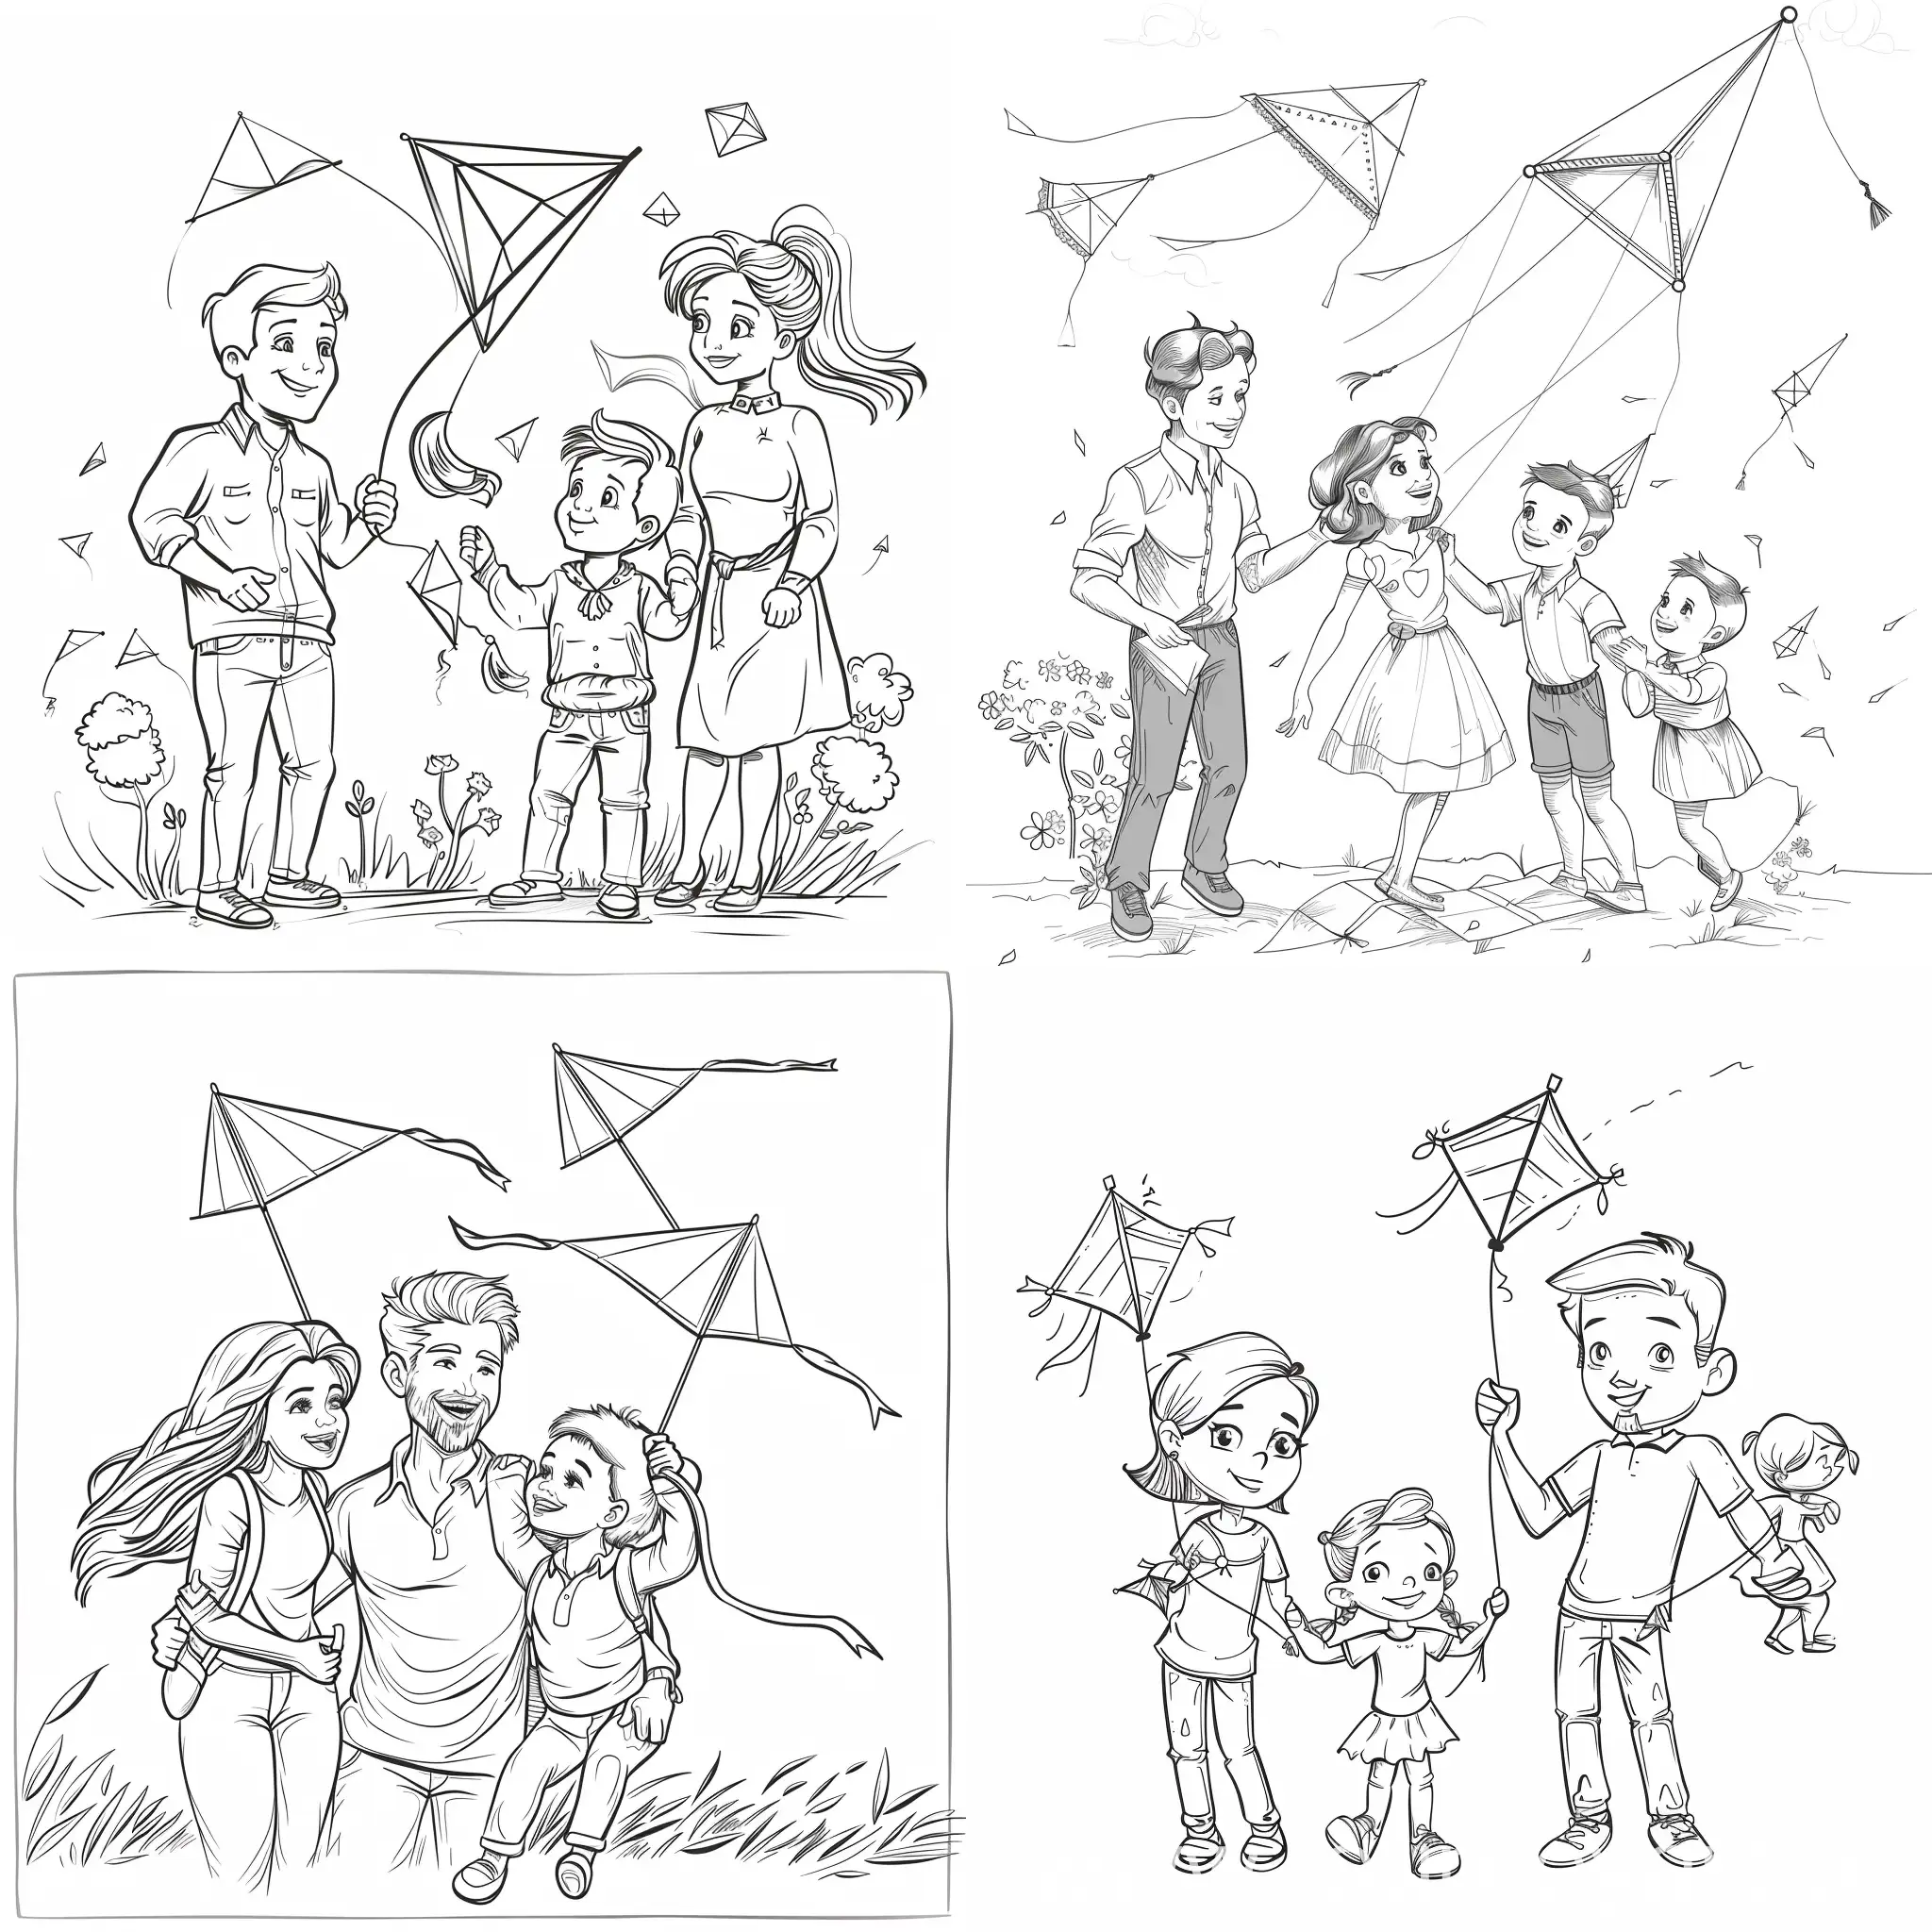 Family-Love-Coloring-Page-Flying-Kites-Together